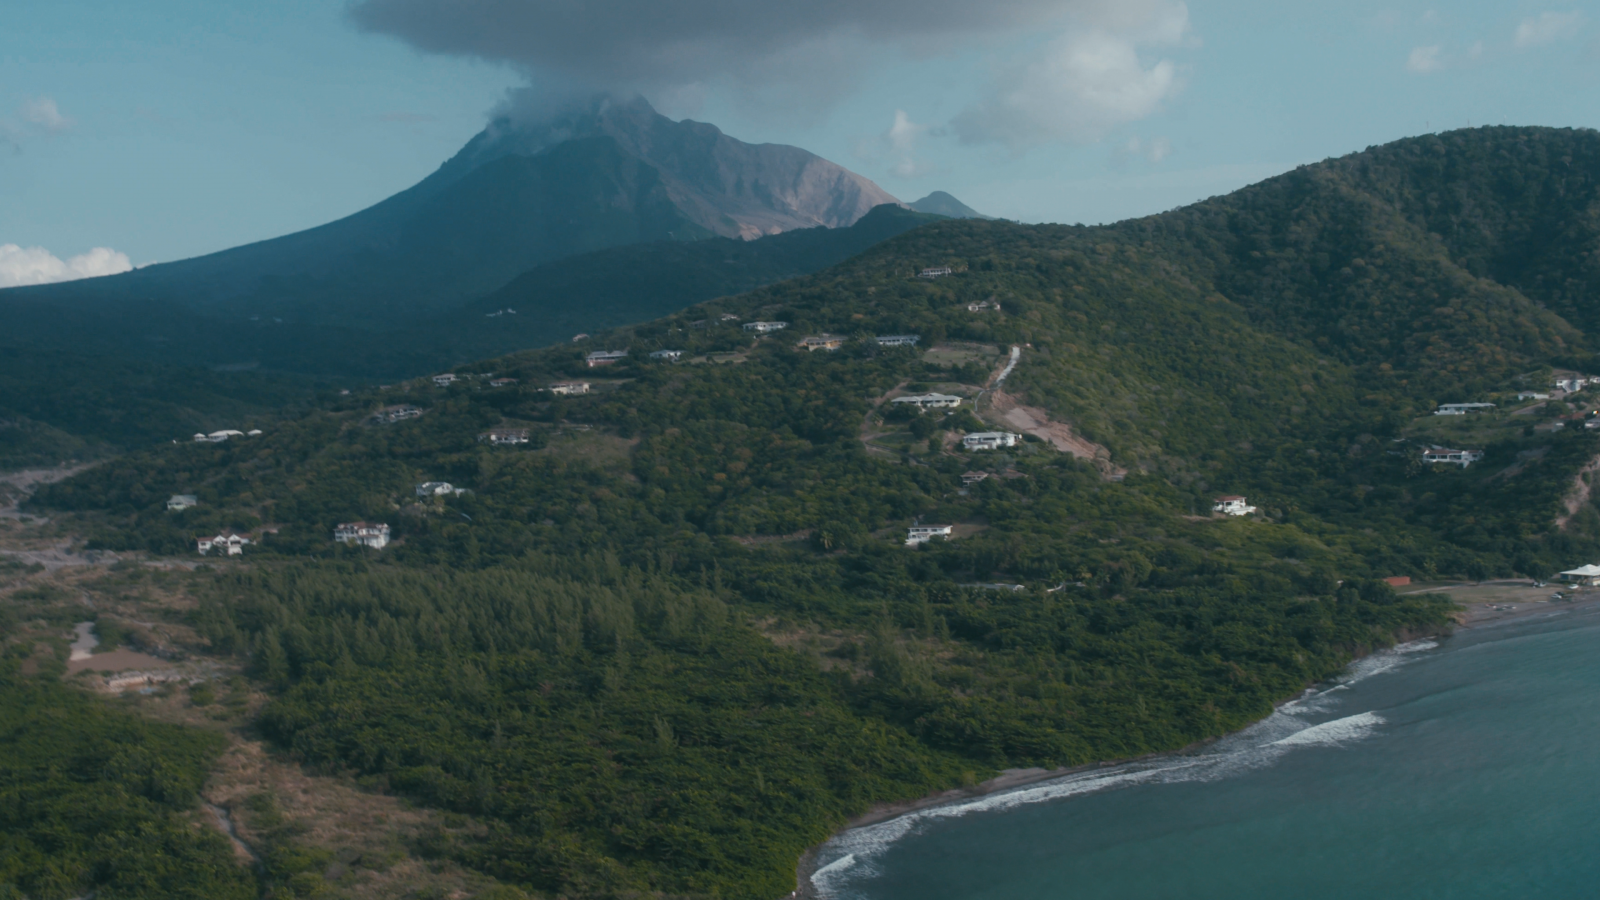 The devil in disguise: filmmaking lives under the threat of volcanoes.